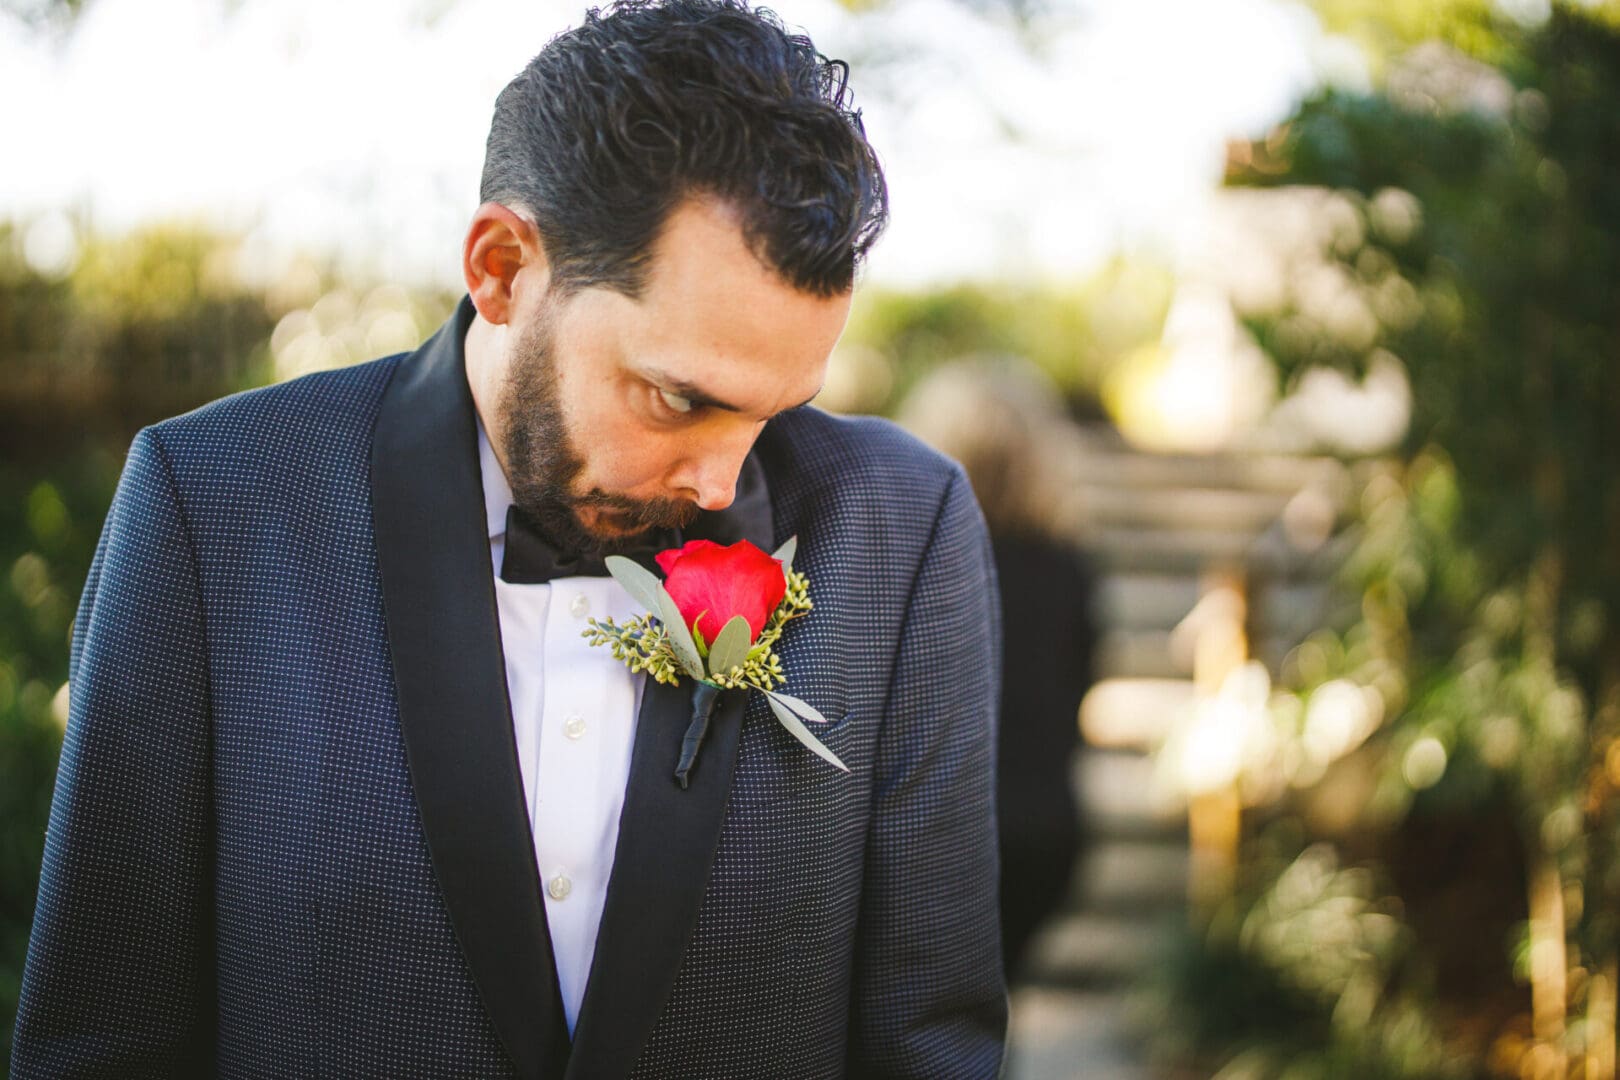 A man in a tuxedo with a rose in his lapel.